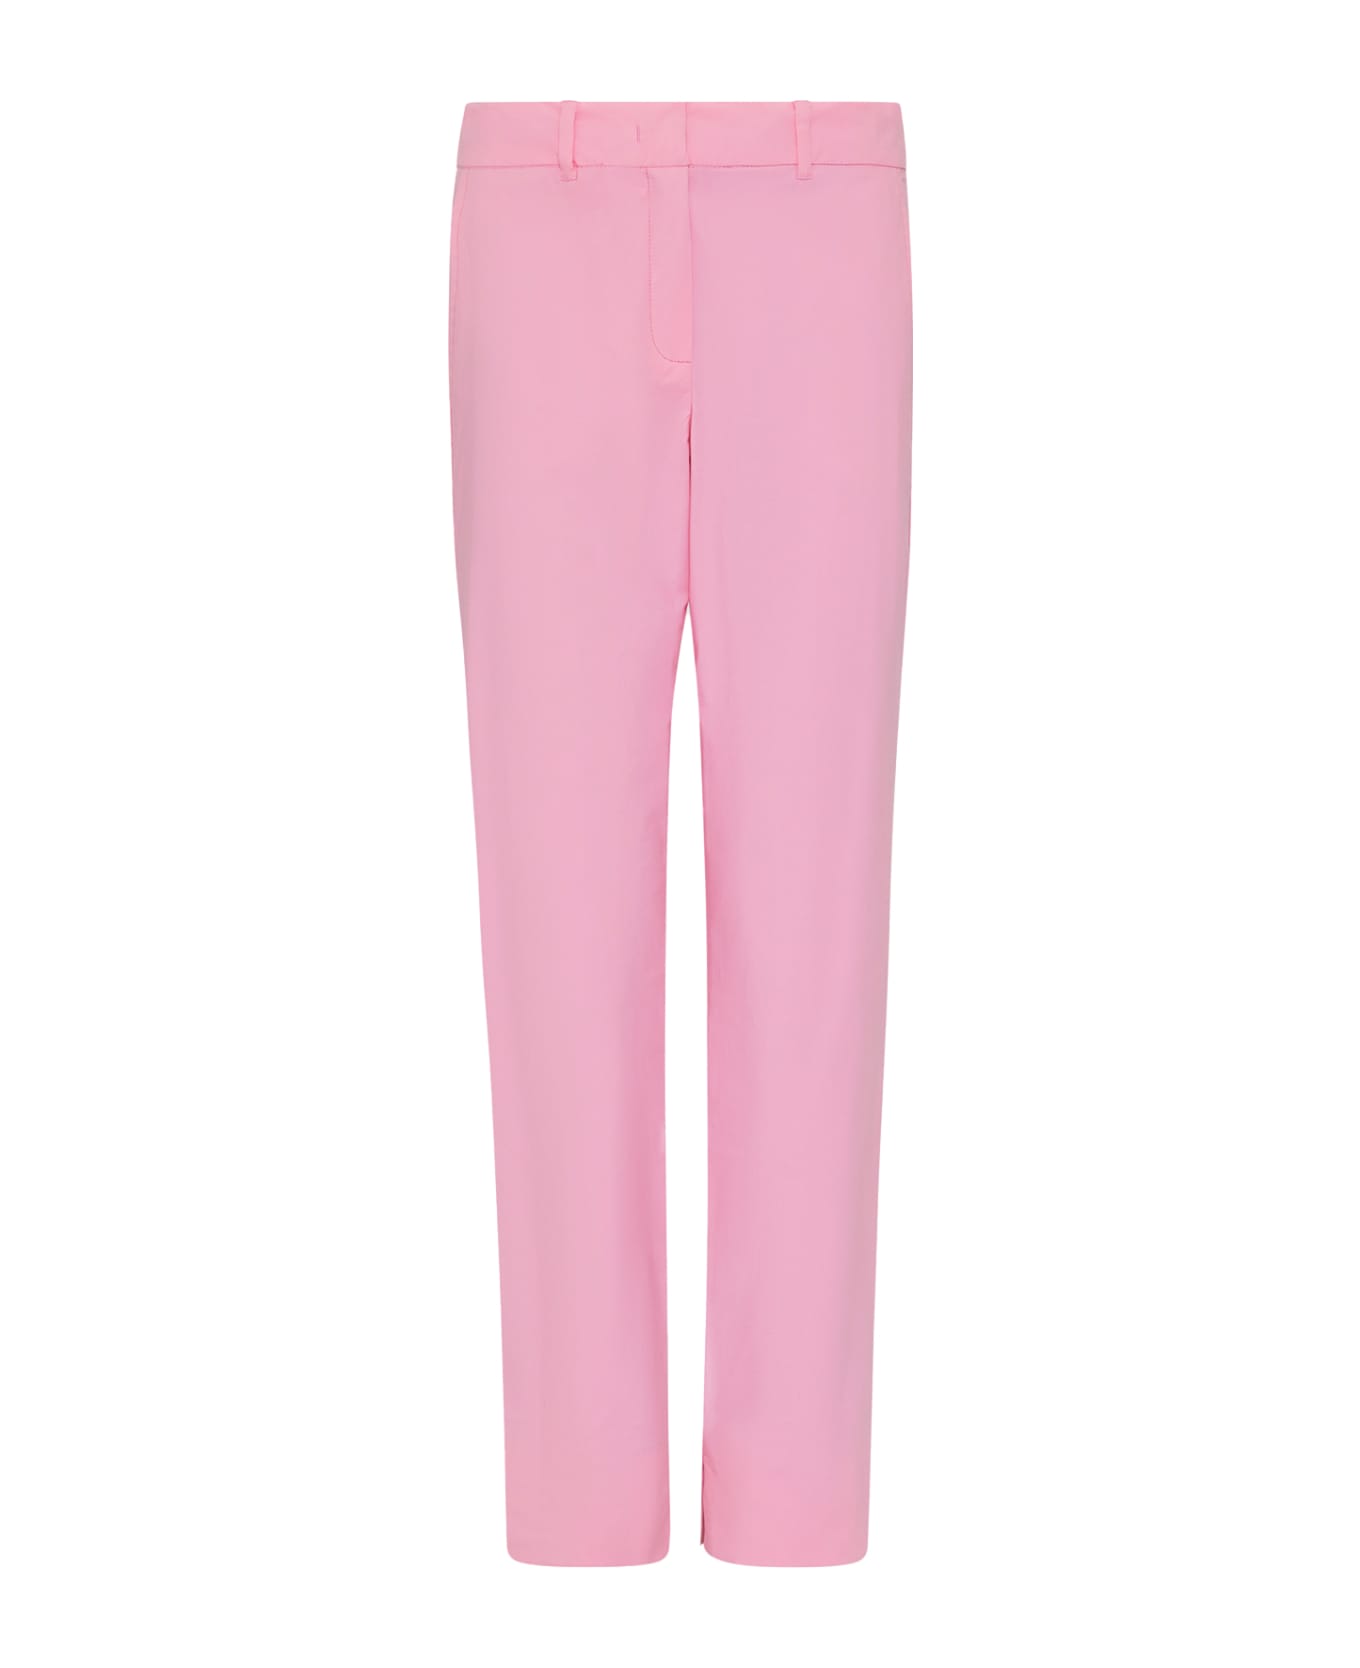 Marella Pink High-waisted Trousers - ROSA INTENSO